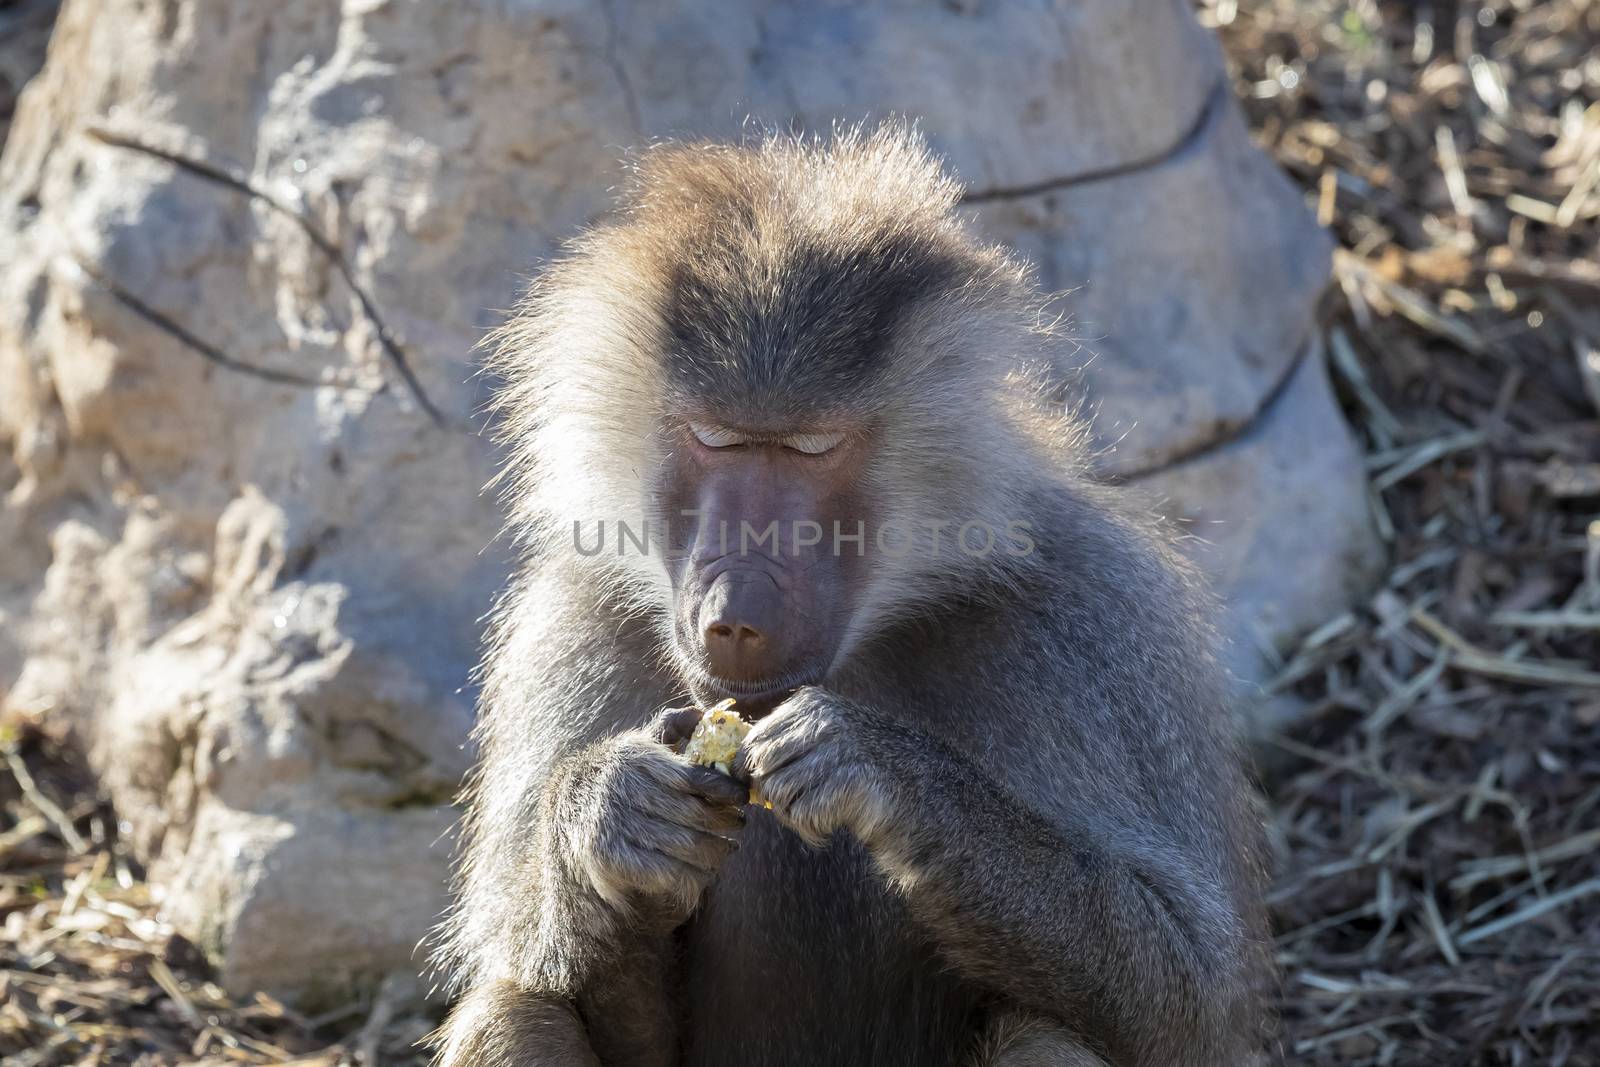 An adolescent Hamadryas Baboon eating food in the outdoors by WittkePhotos